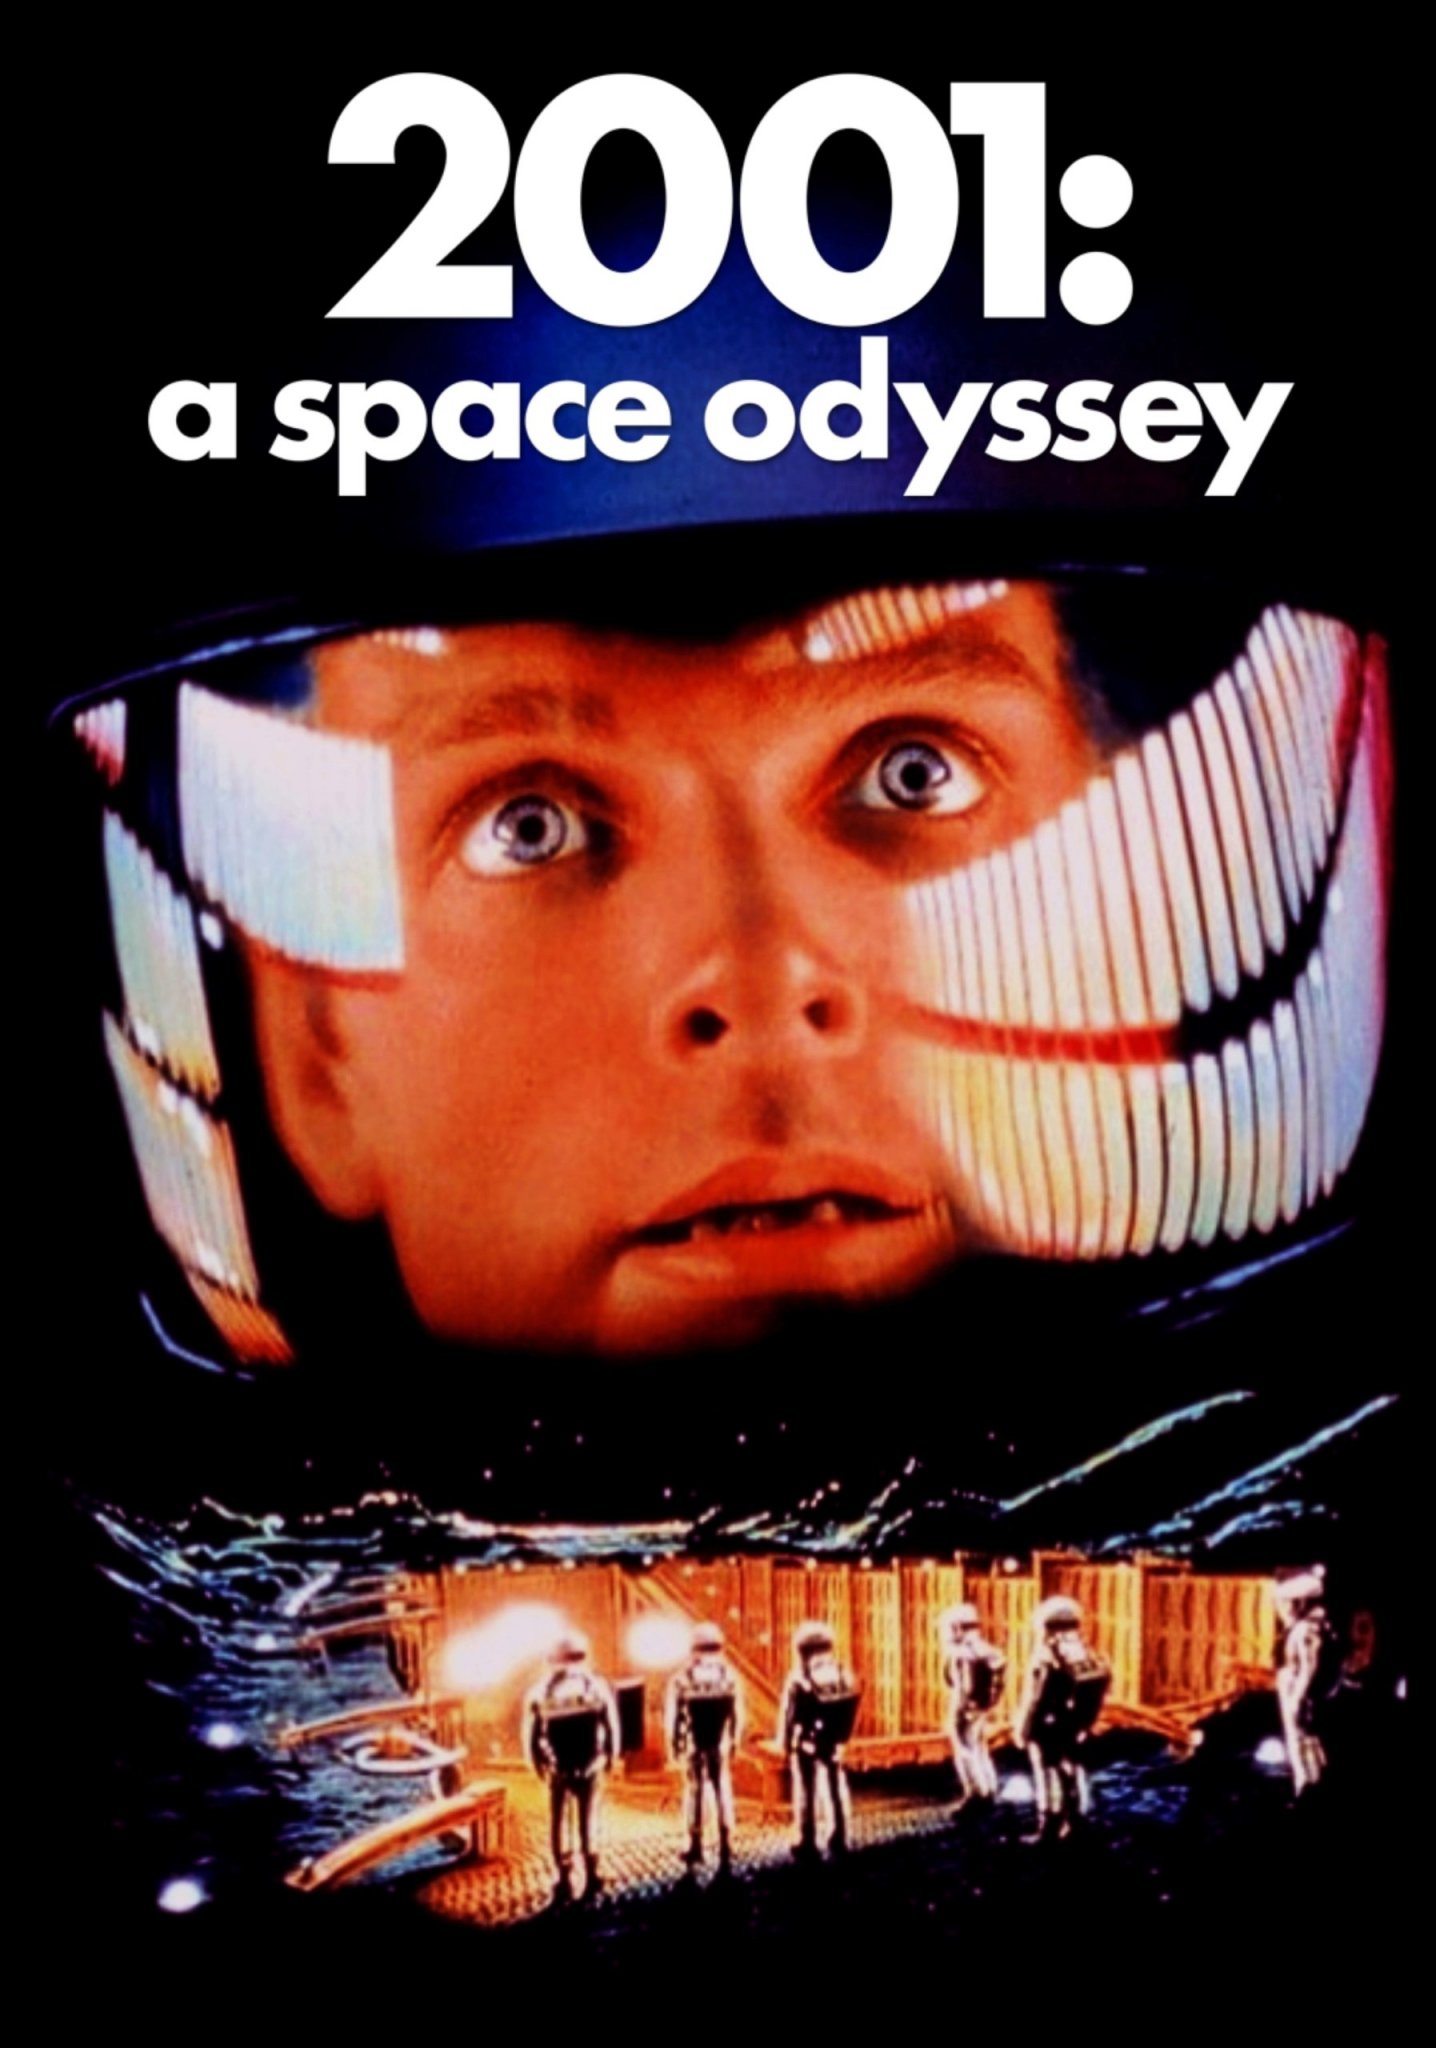 2001-a-space-odyssey-dvd-cover-art-scaled.jpg